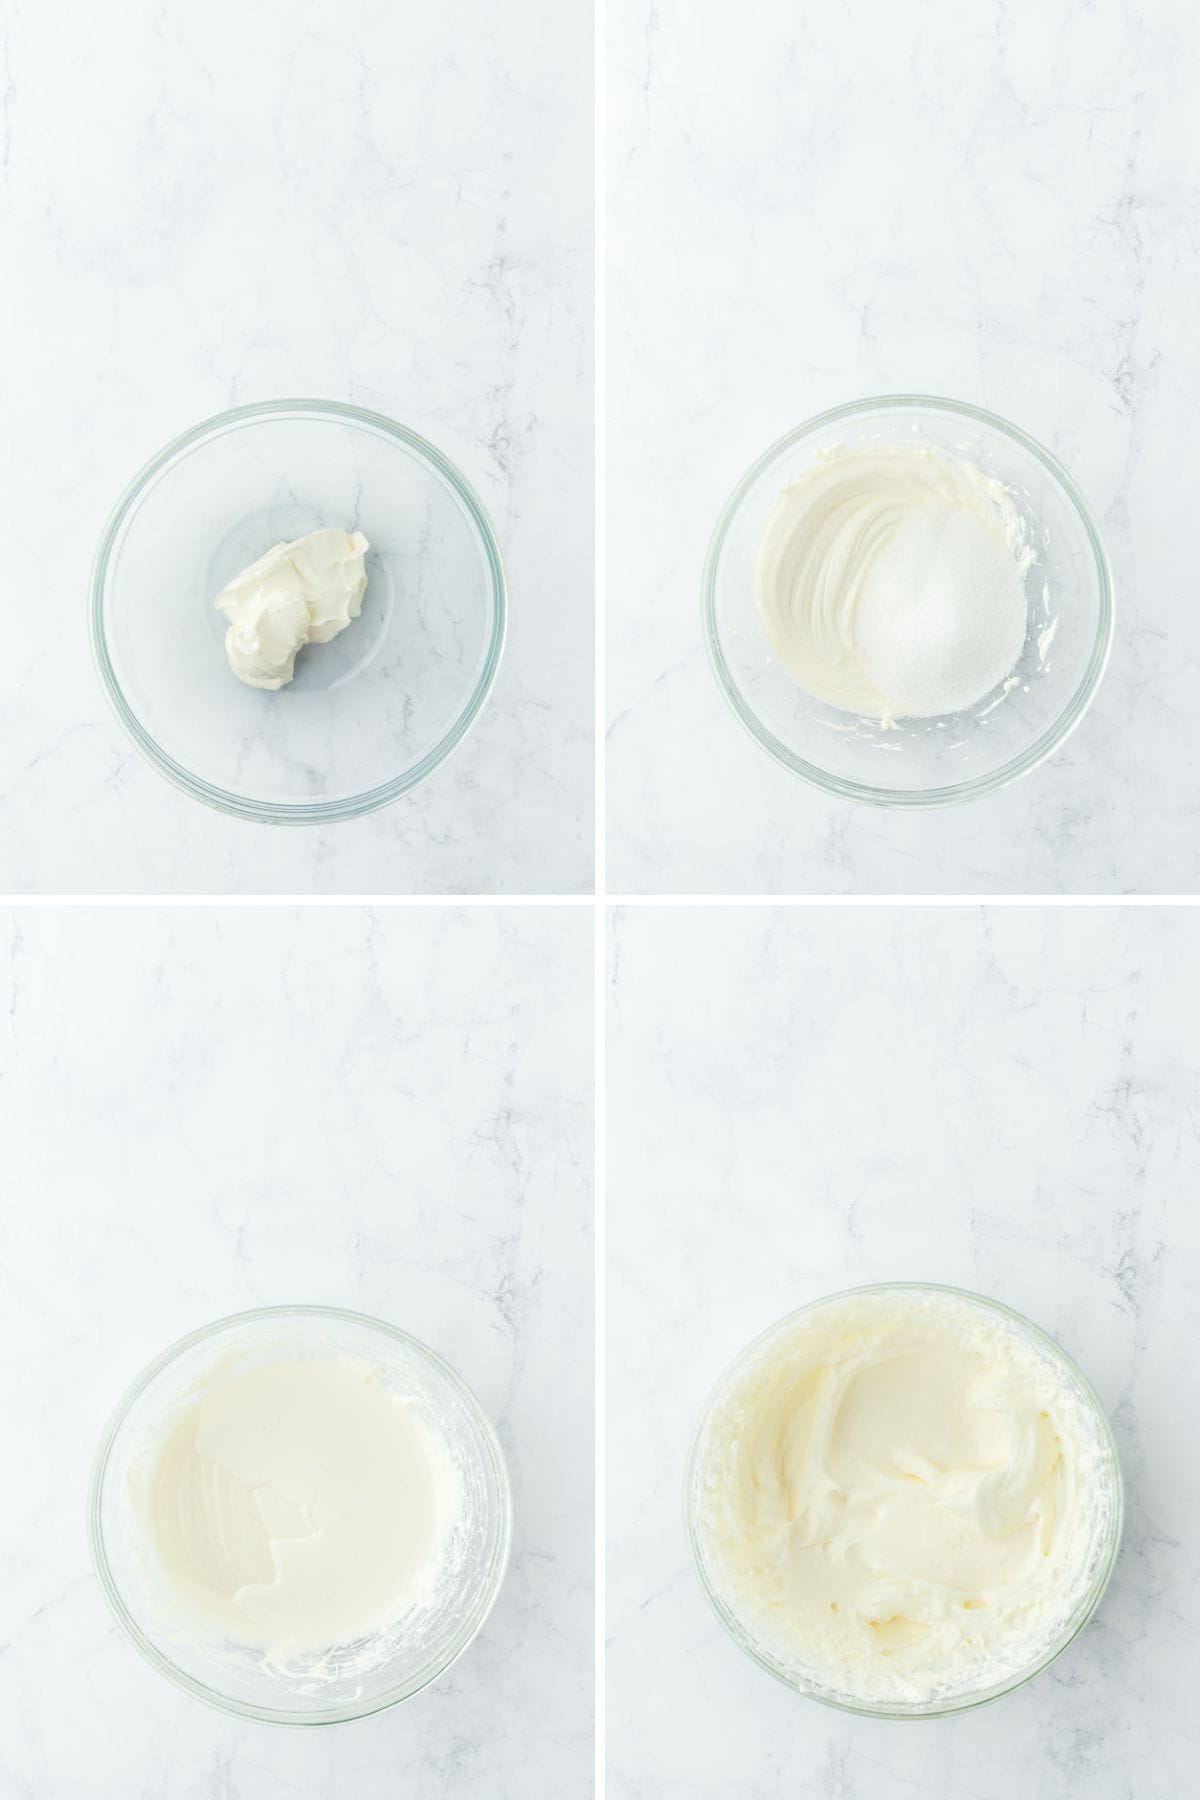 A collage of images showing how to make whipped cream.